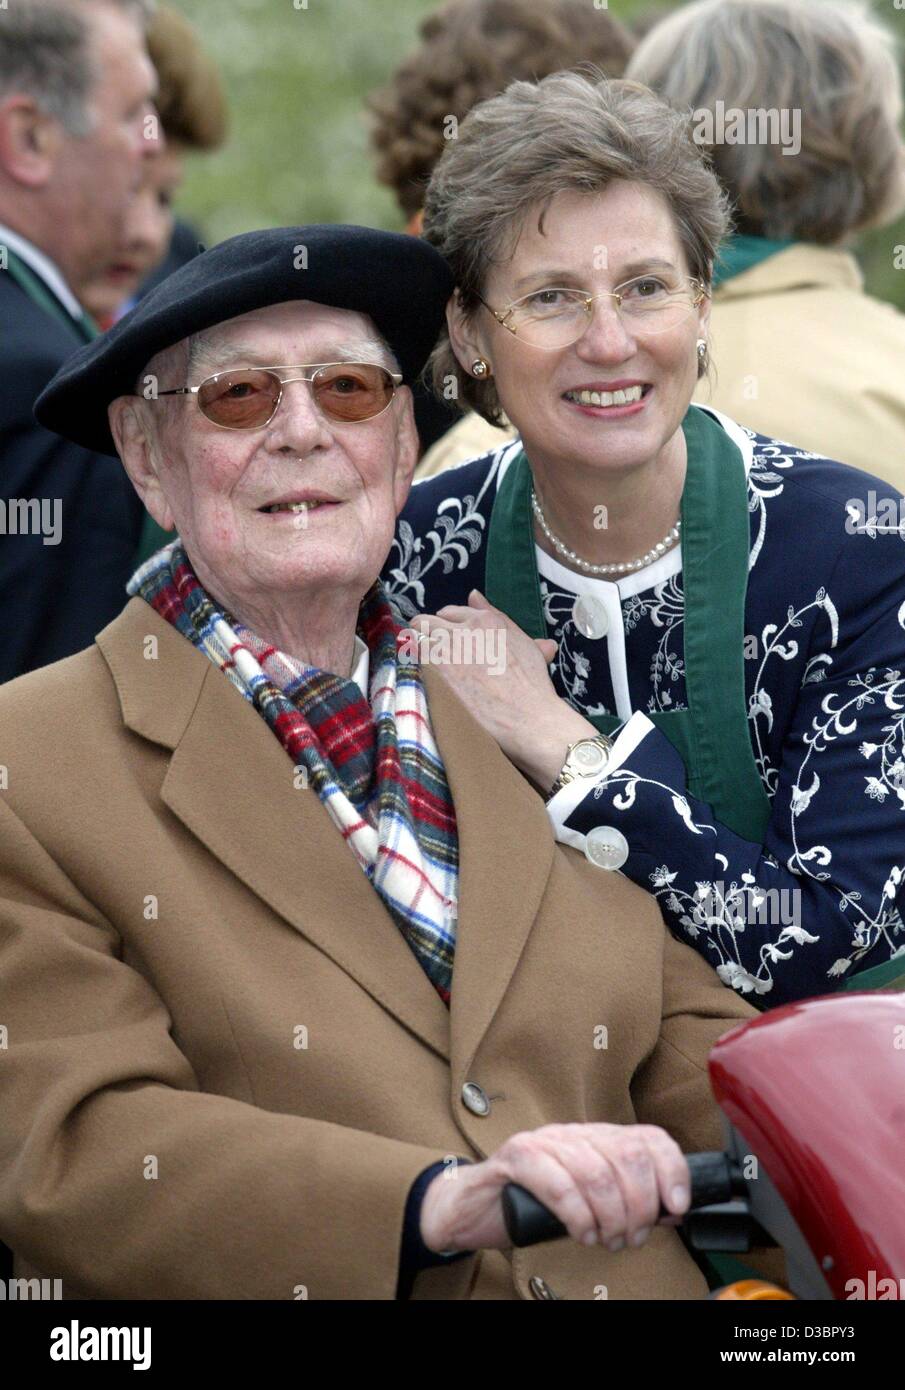 (dpa files) - Countess Sonja Bernadotte puts her arm around Count Lennart Bernadotte (L) during the celebrations for his 95th birthday on the Island of Mainau in Lake Constance, Germany, 8 May 2004. Count Lennart Bernadotte, lord of the 'flower island' of Mainau in Germany's warm Lake Constance, die Stock Photo